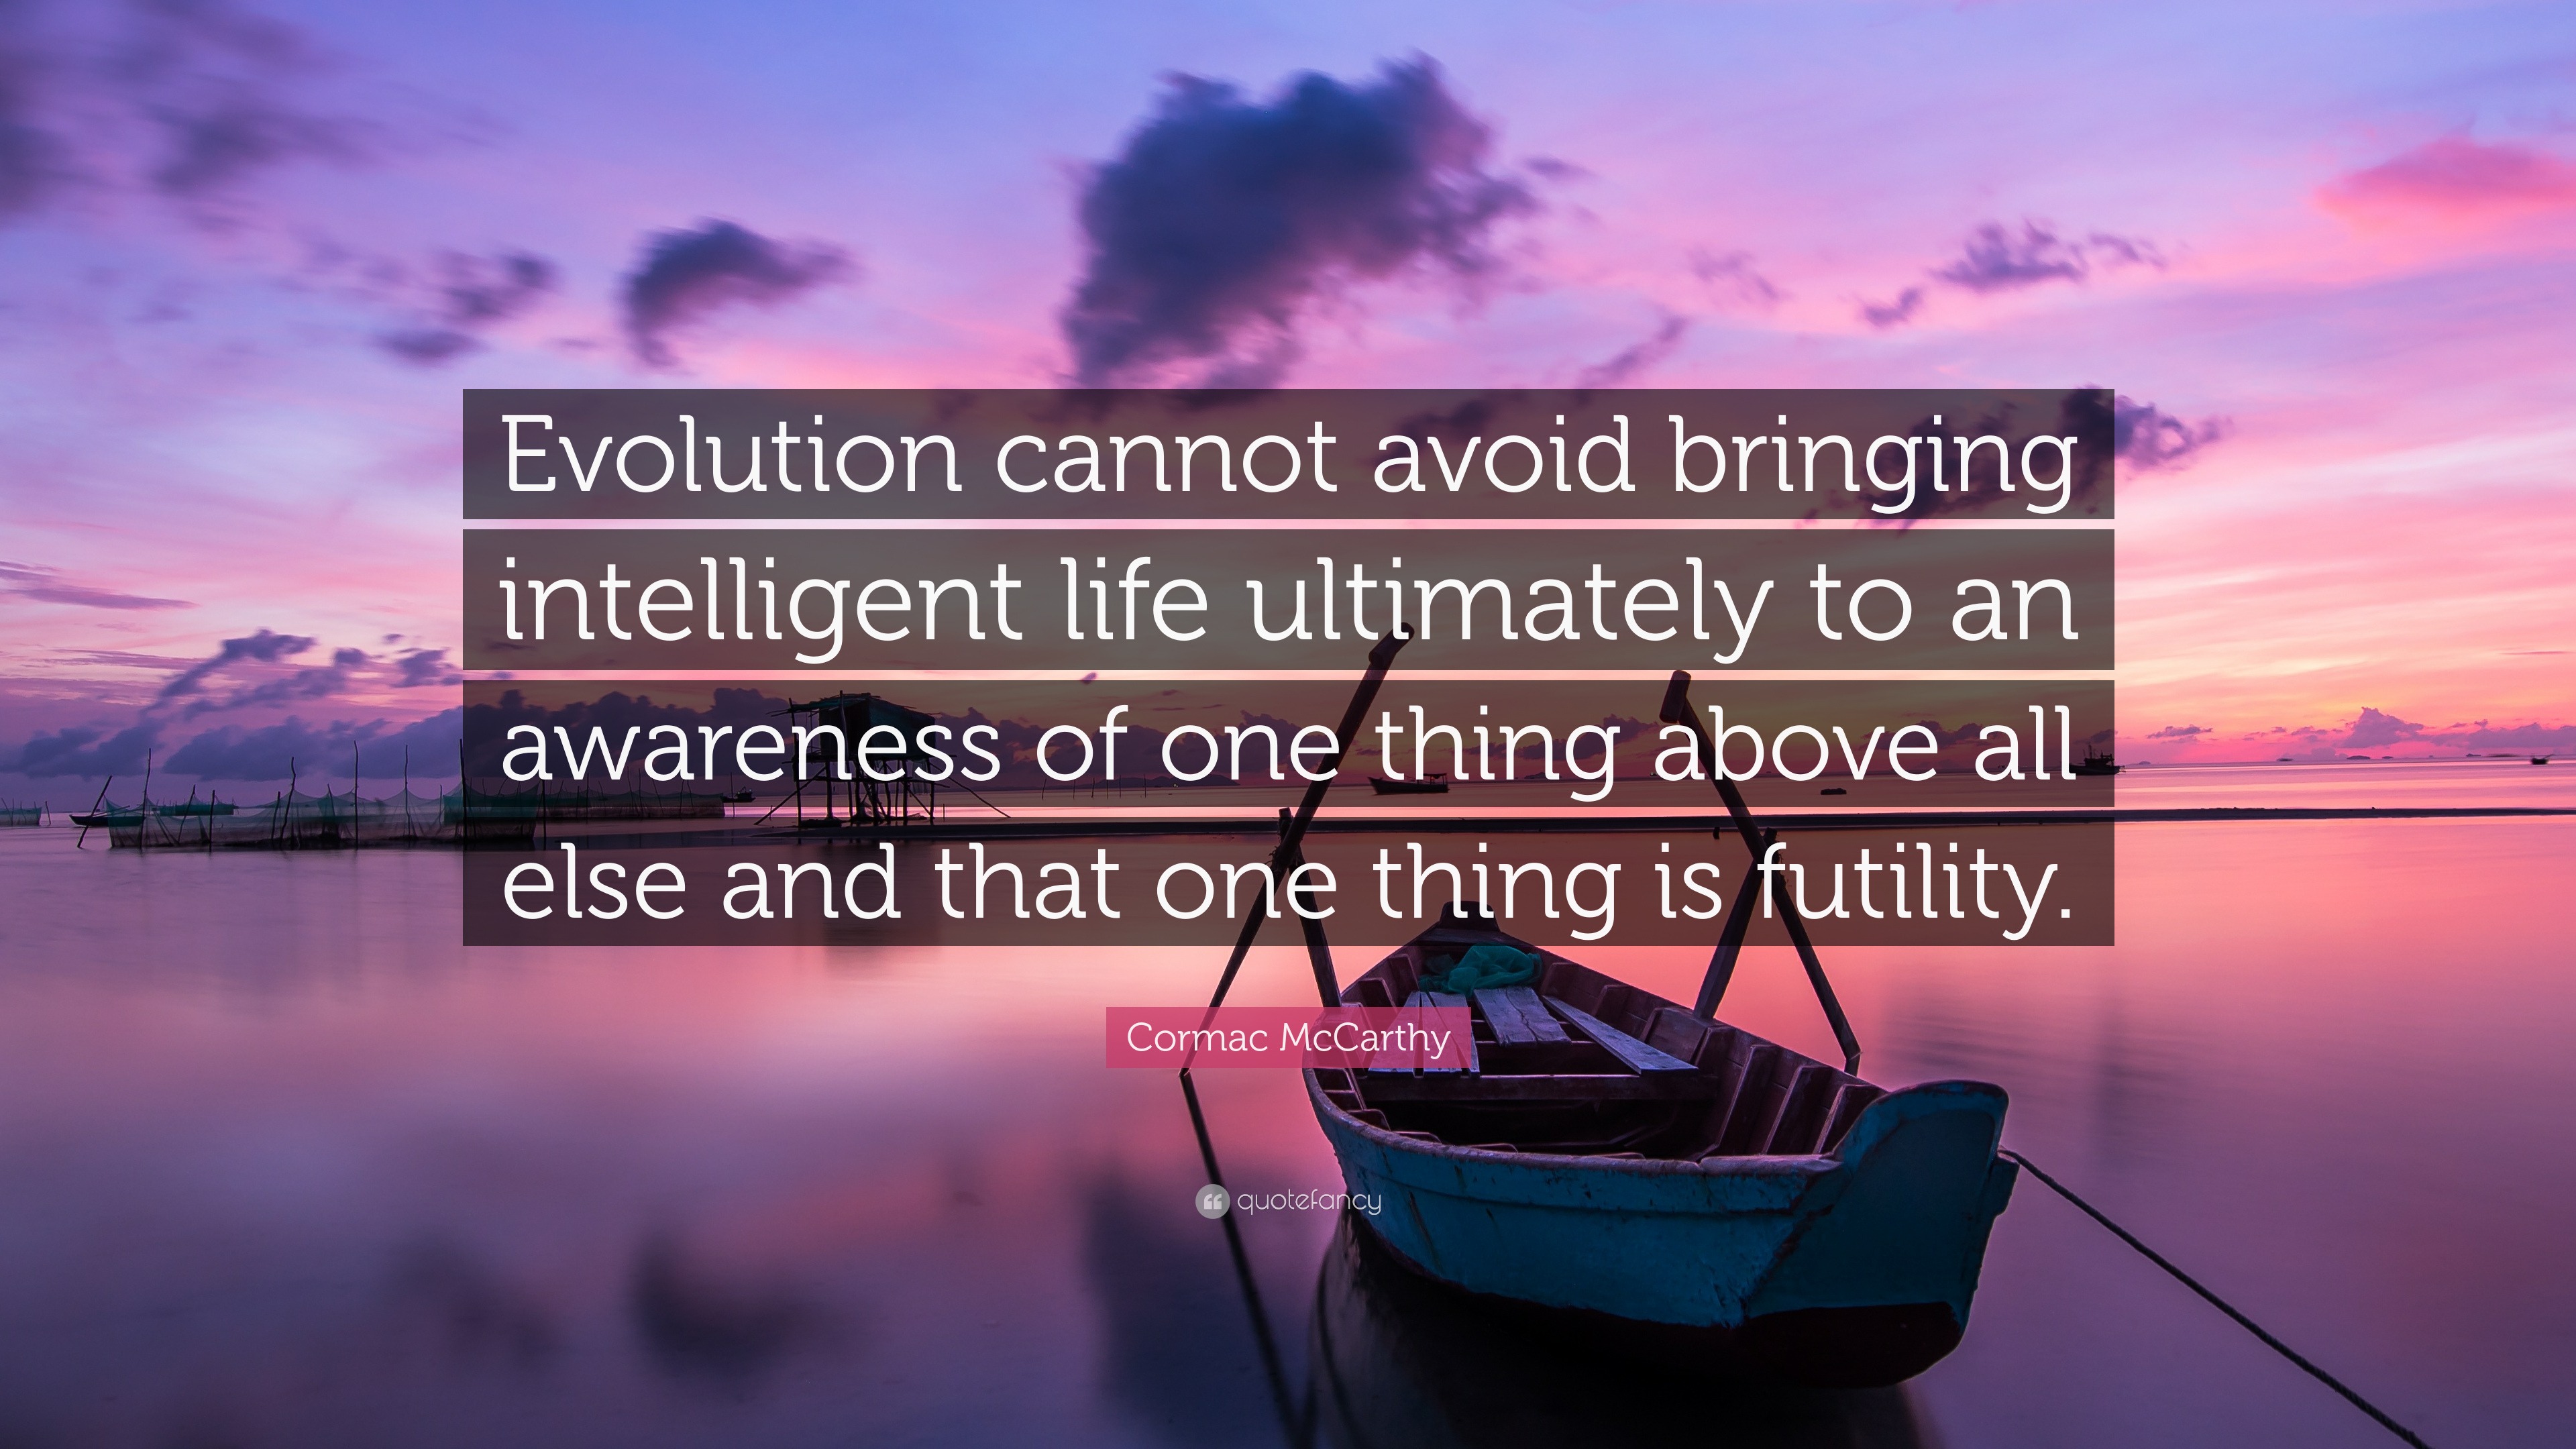 Cormac McCarthy Quote: “Evolution cannot avoid bringing intelligent life  ultimately to an awareness of one thing above all else and that one thi...”